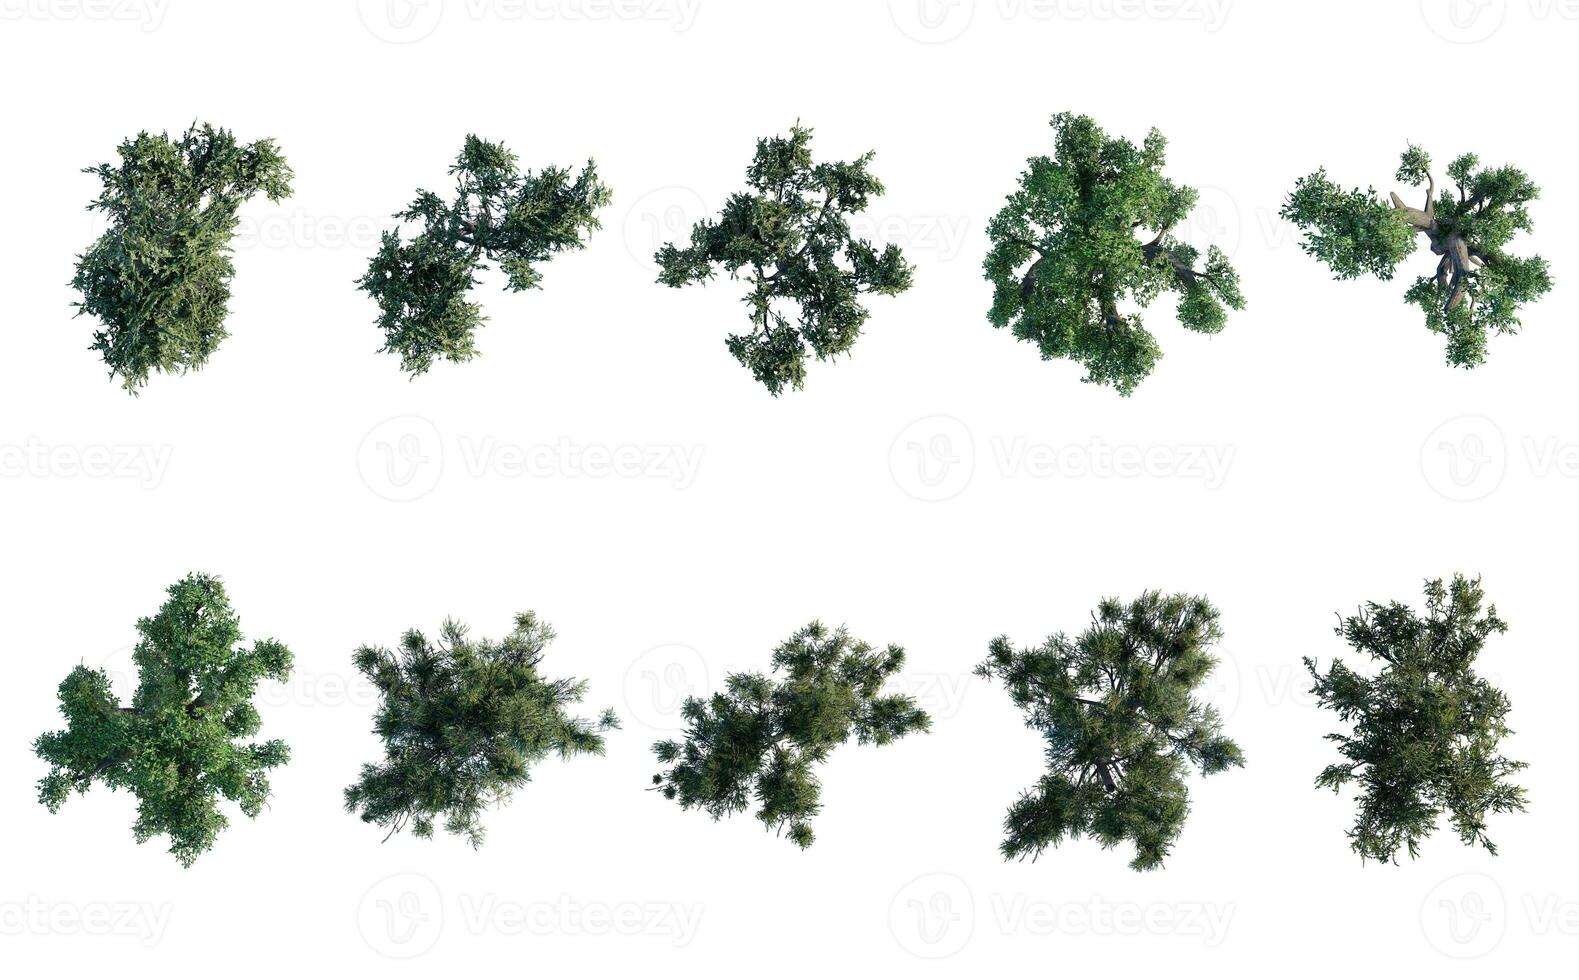 tree top view plant landscape architecture nature garden aerial render. trees branch isolate collection illustration environment green botany urban bush park. tree architecture conifer decorative. photo